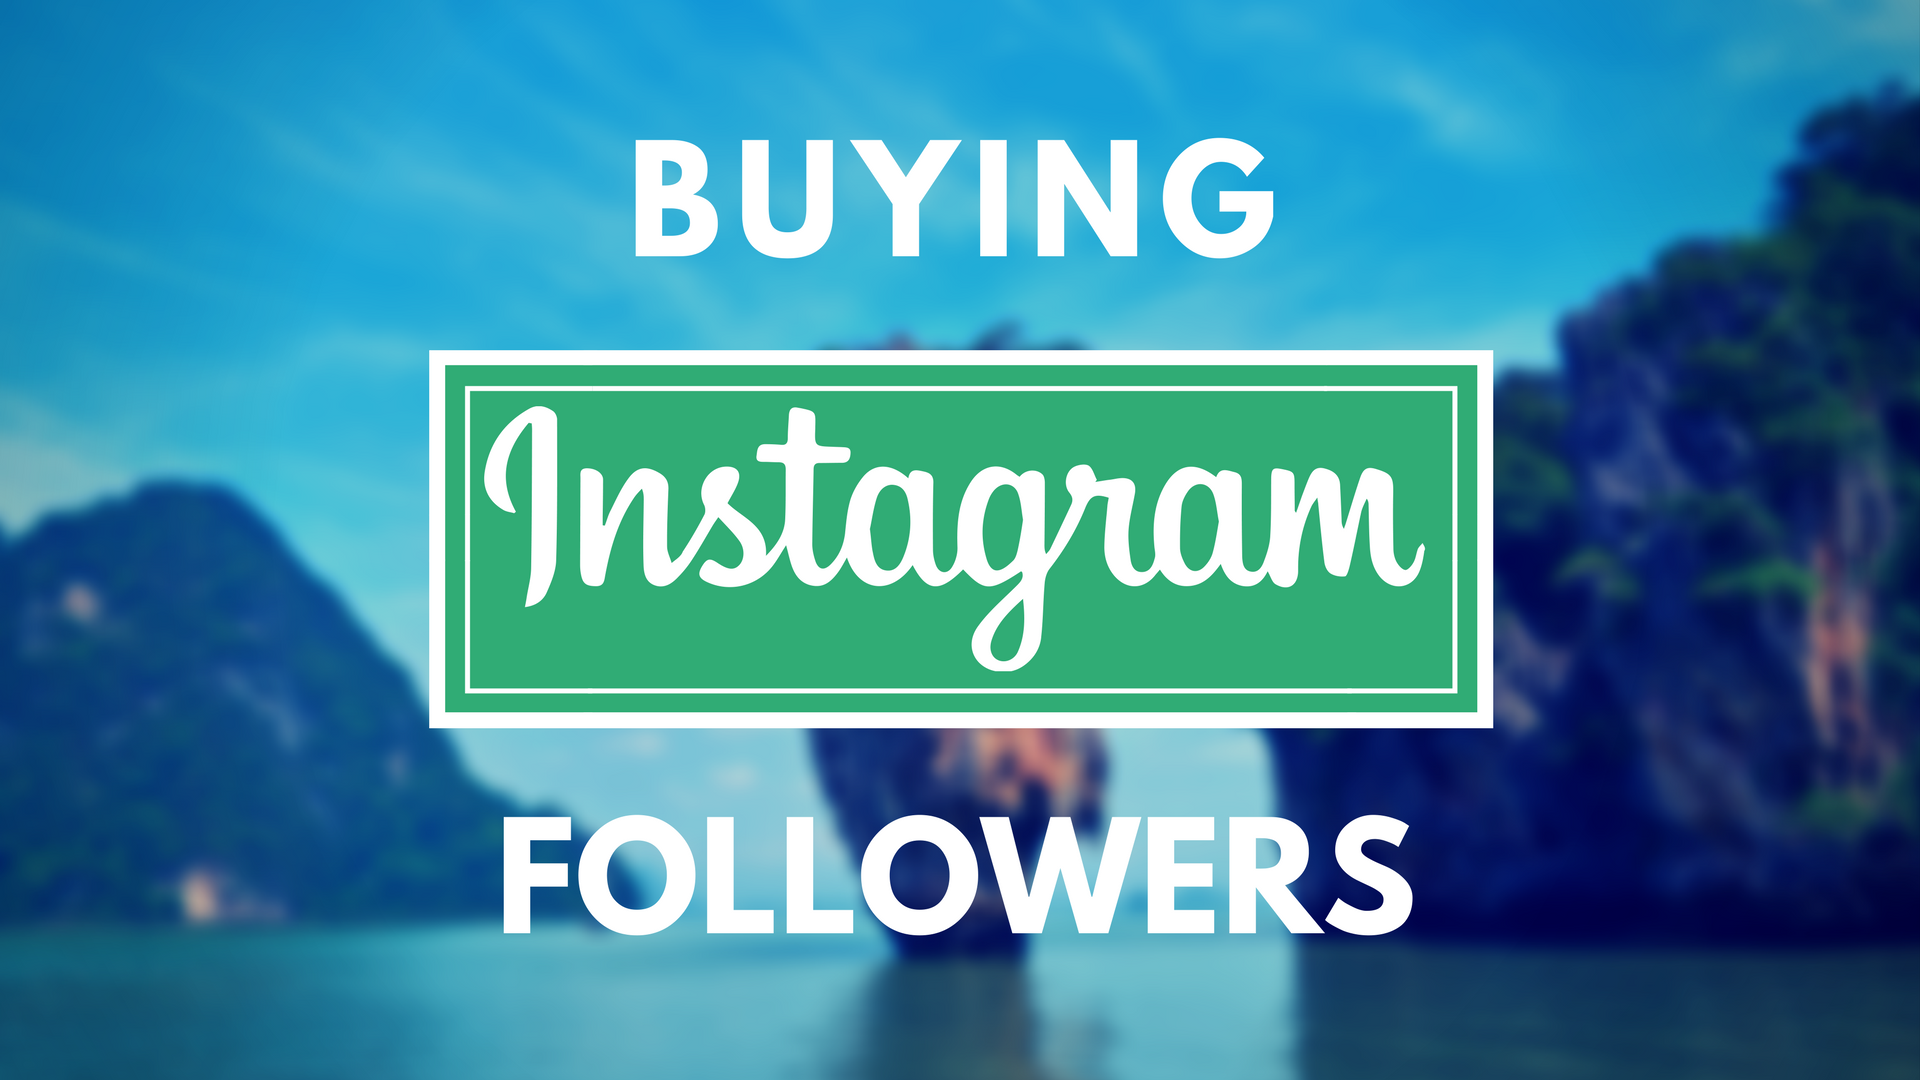 The Best List of Tips to Get Followers on Instagram